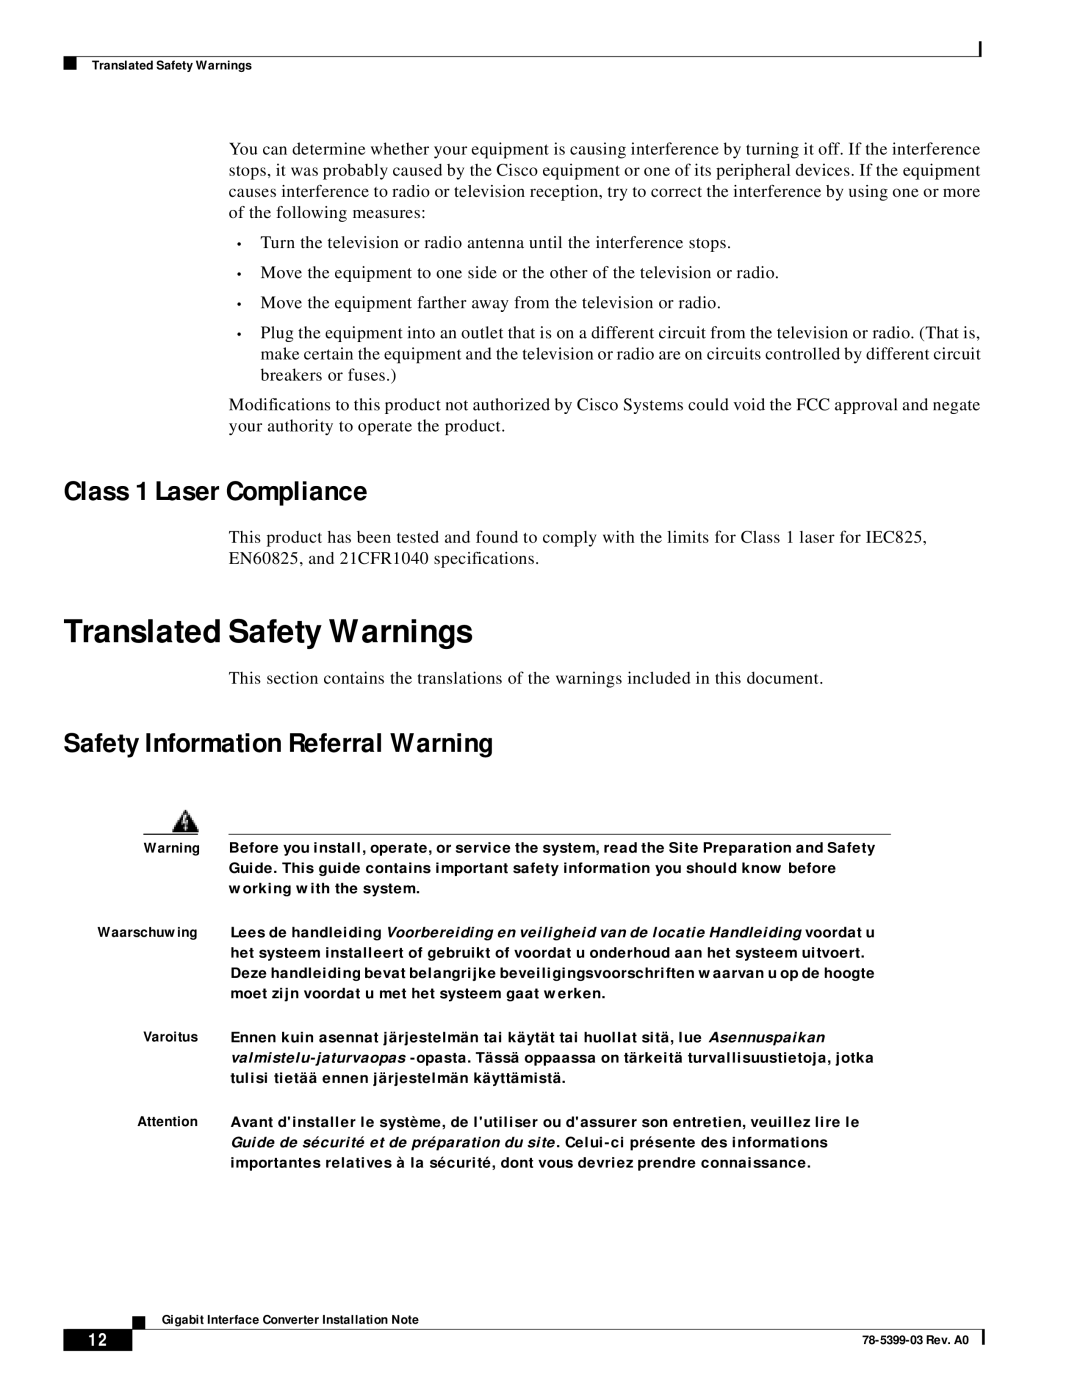 Cisco Systems WS-G5487, WS-G5484 Translated Safety Warnings, Class 1 Laser Compliance, Safety Information Referral Warning 